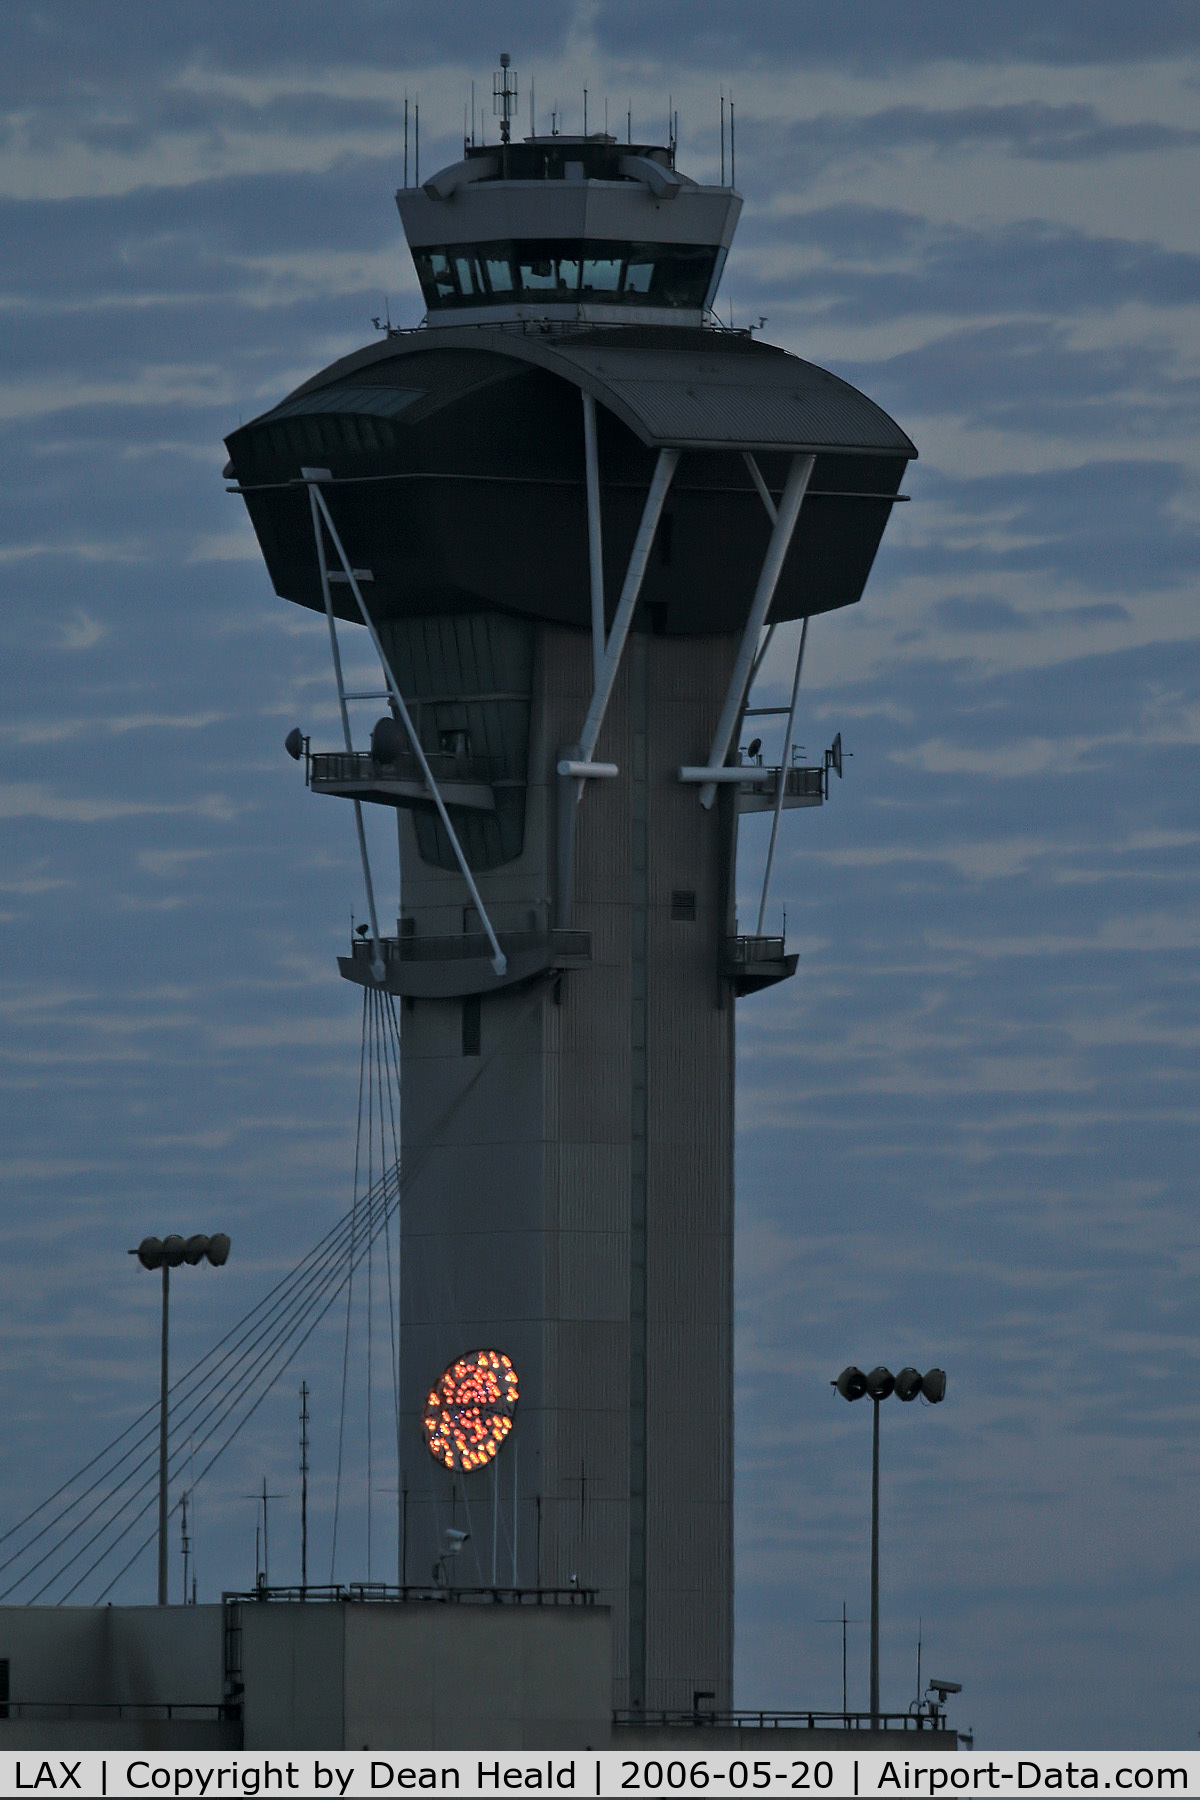 Los Angeles International Airport (LAX) - Looking south at the LAX control tower in the evening.